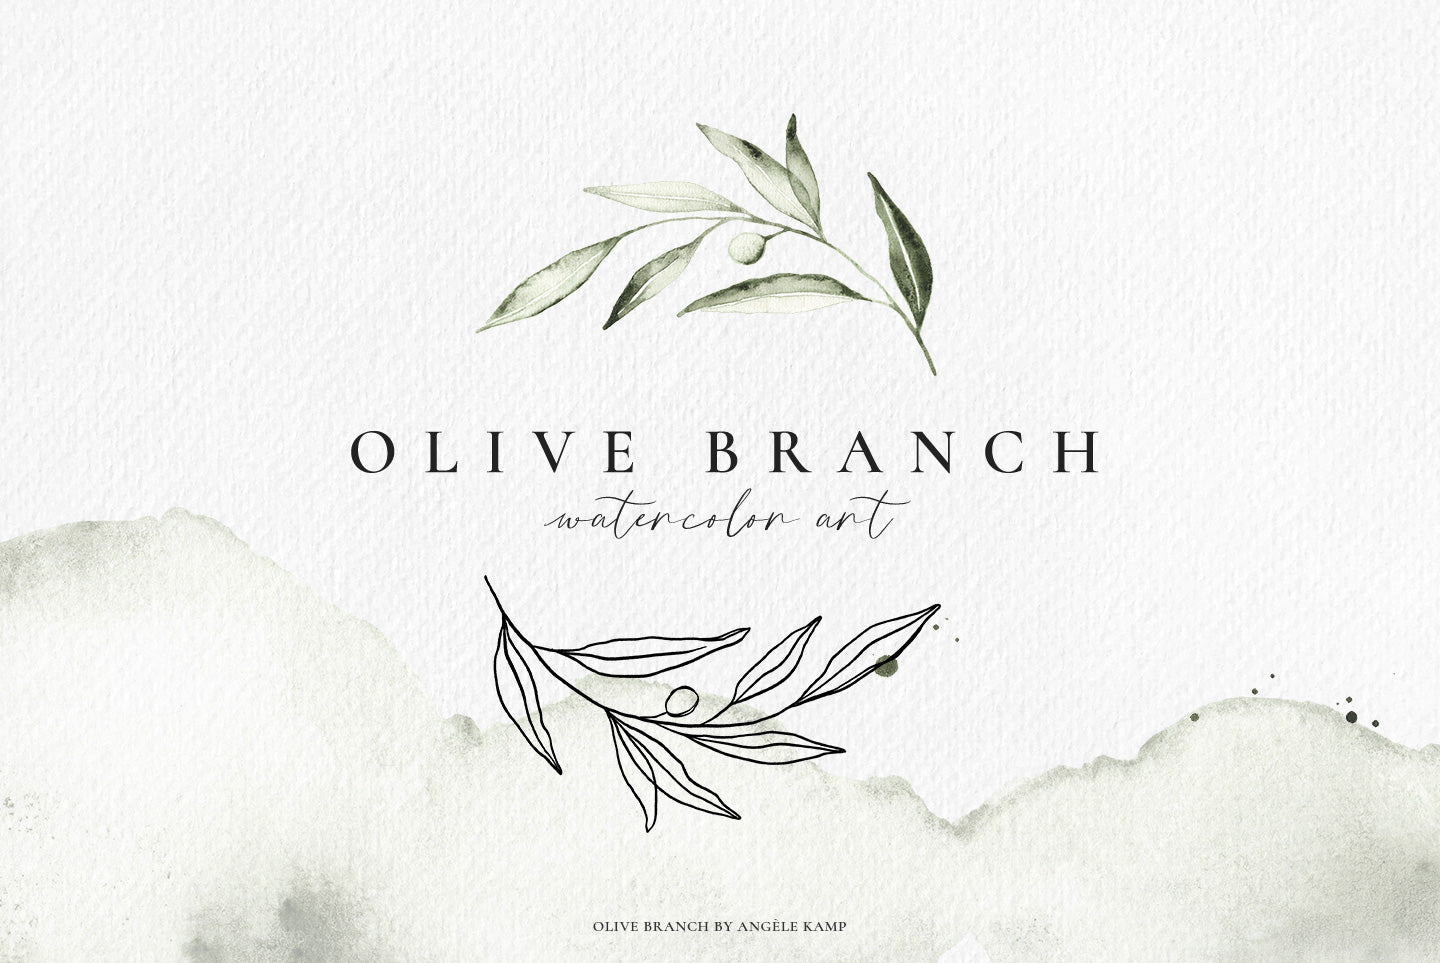 Olive branch watercolors